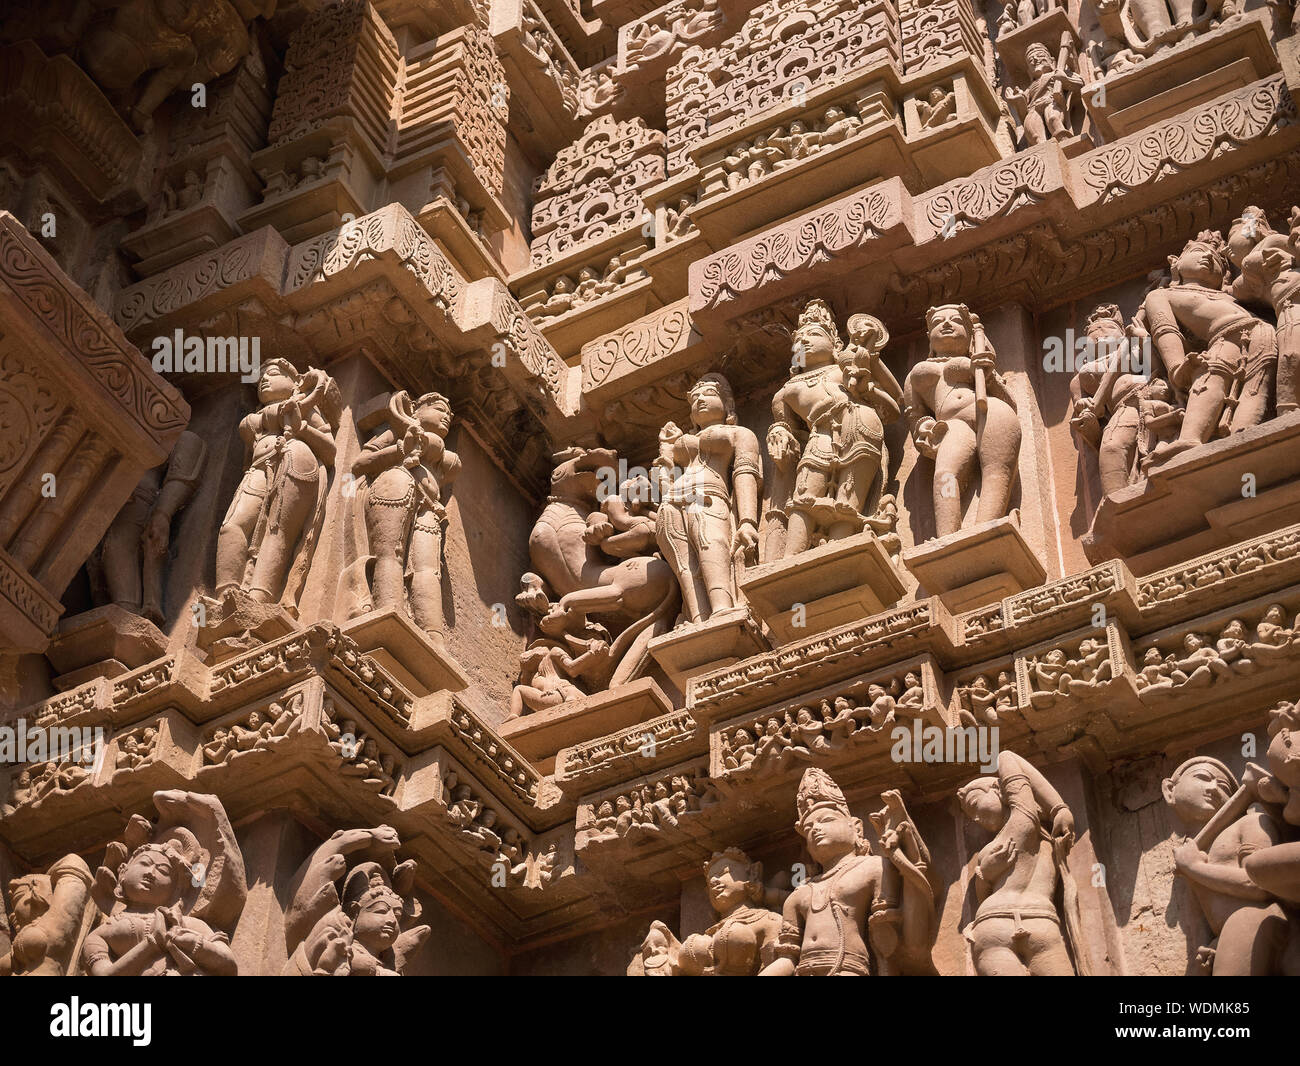 Travel Articles | Travel Blogs | Travel News & Information | Travel Guide | India.comKhajuraho Temples Are an Epitome of Architectural Grandeur in Madhya Pradesh | India.com